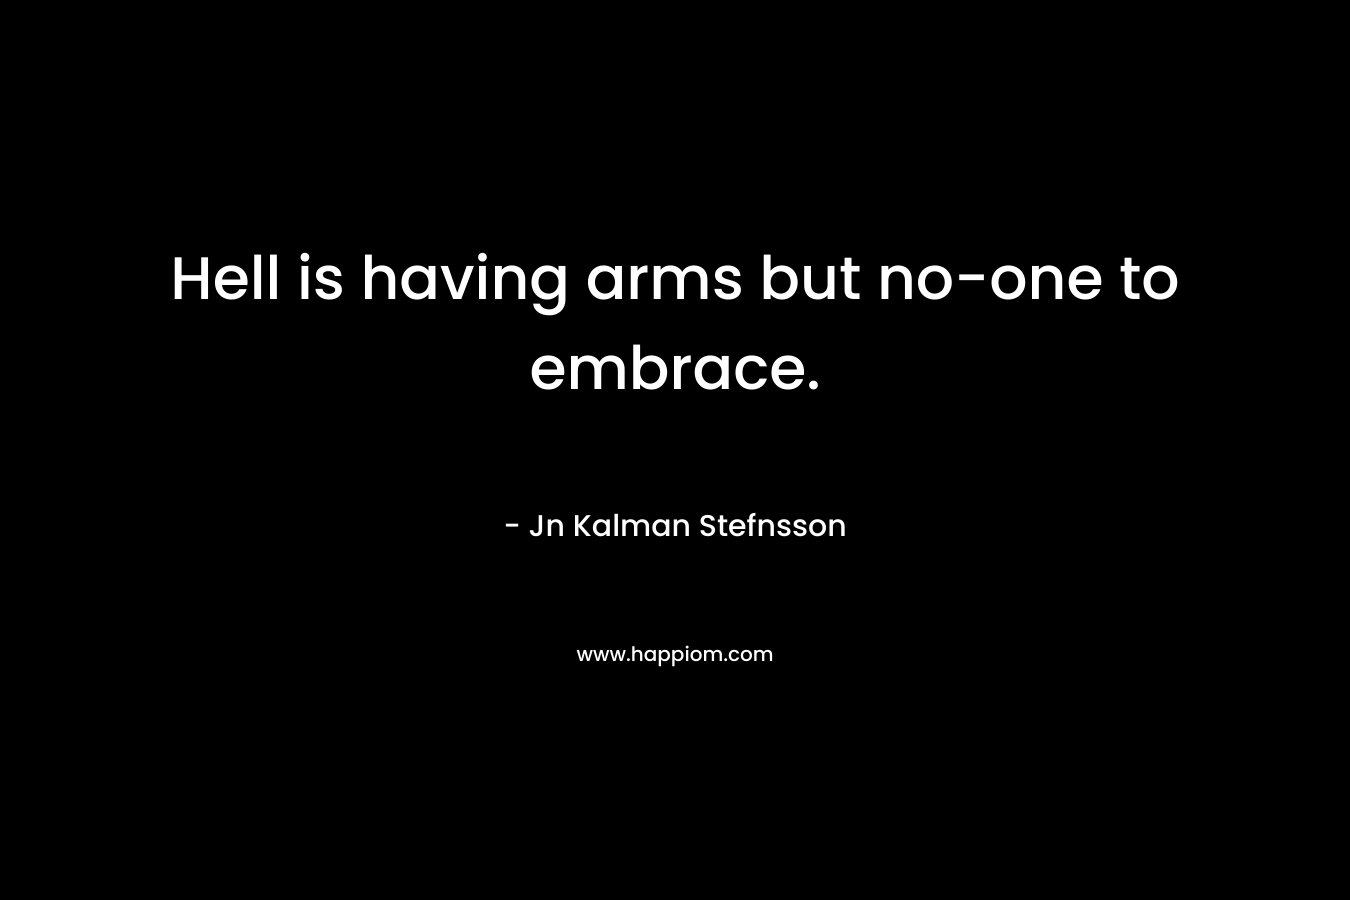 Hell is having arms but no-one to embrace.